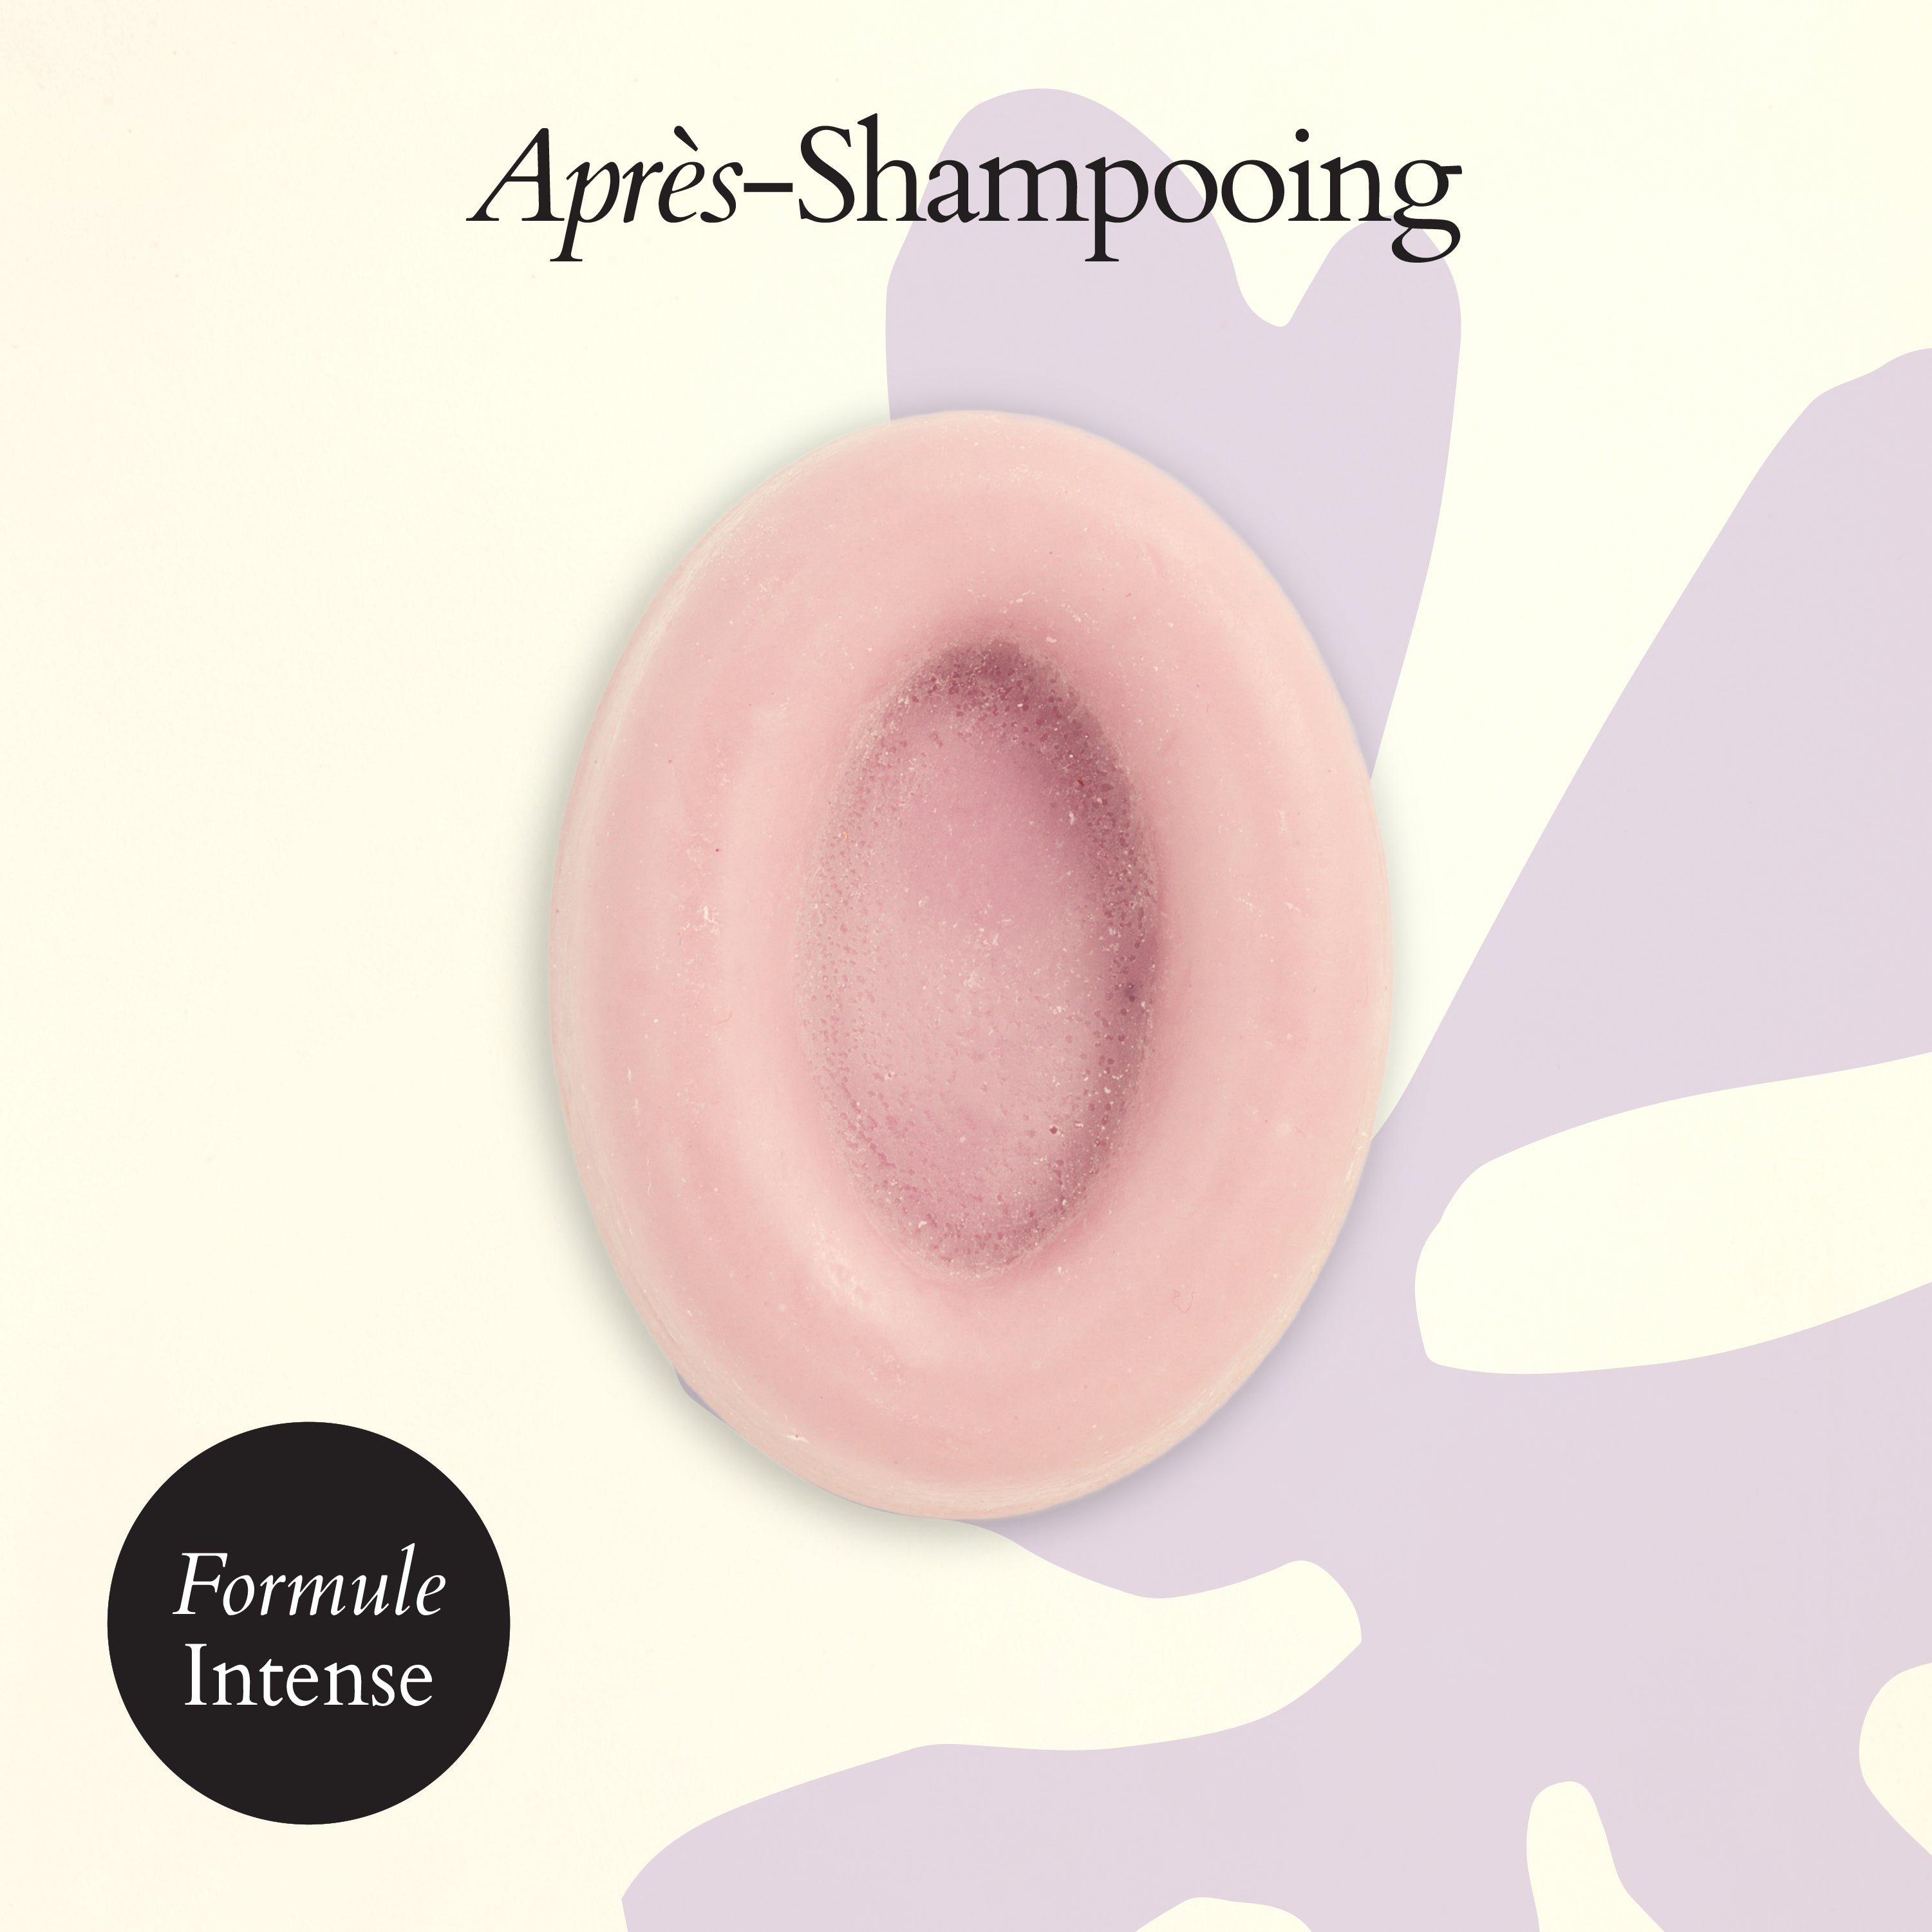 Après-Shampooing solide